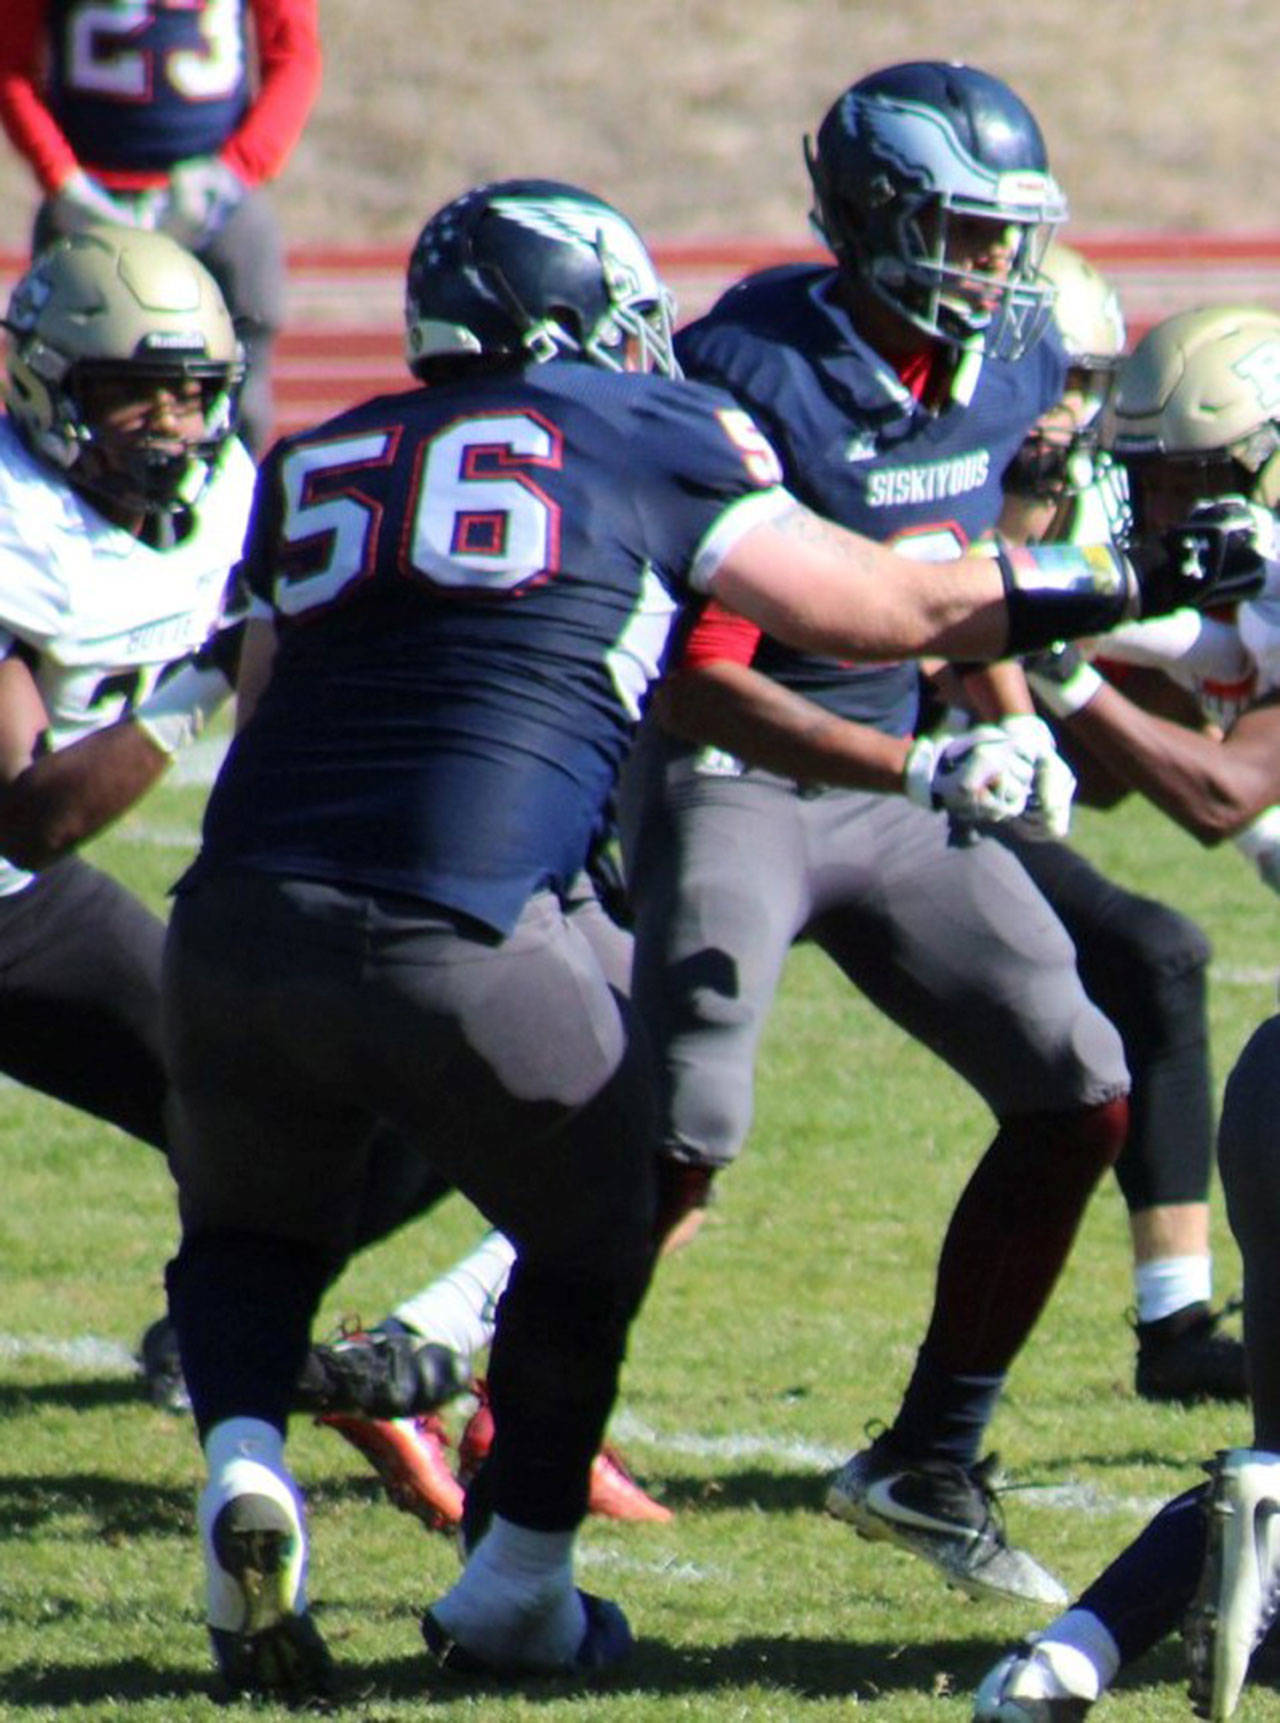 Chase Barthlett (56) blocks during a football game this fall. (Photo courtesy of College of the Siskiyous Athletics)